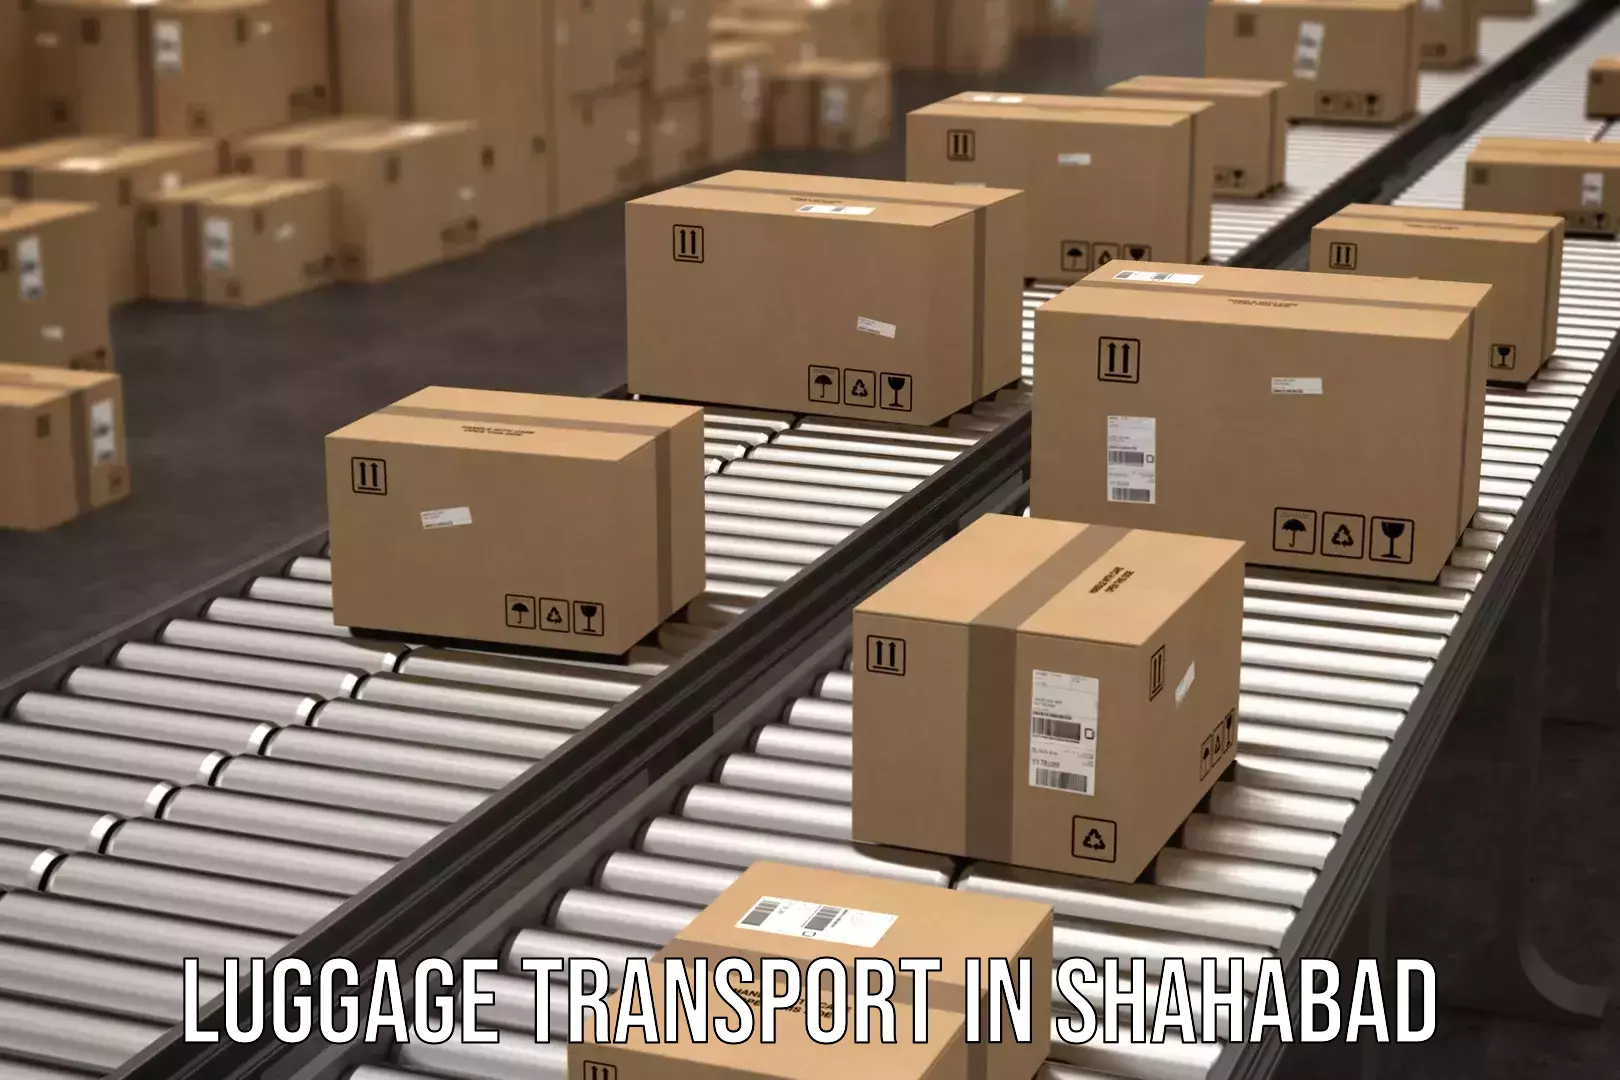 Same day baggage transport in Shahabad